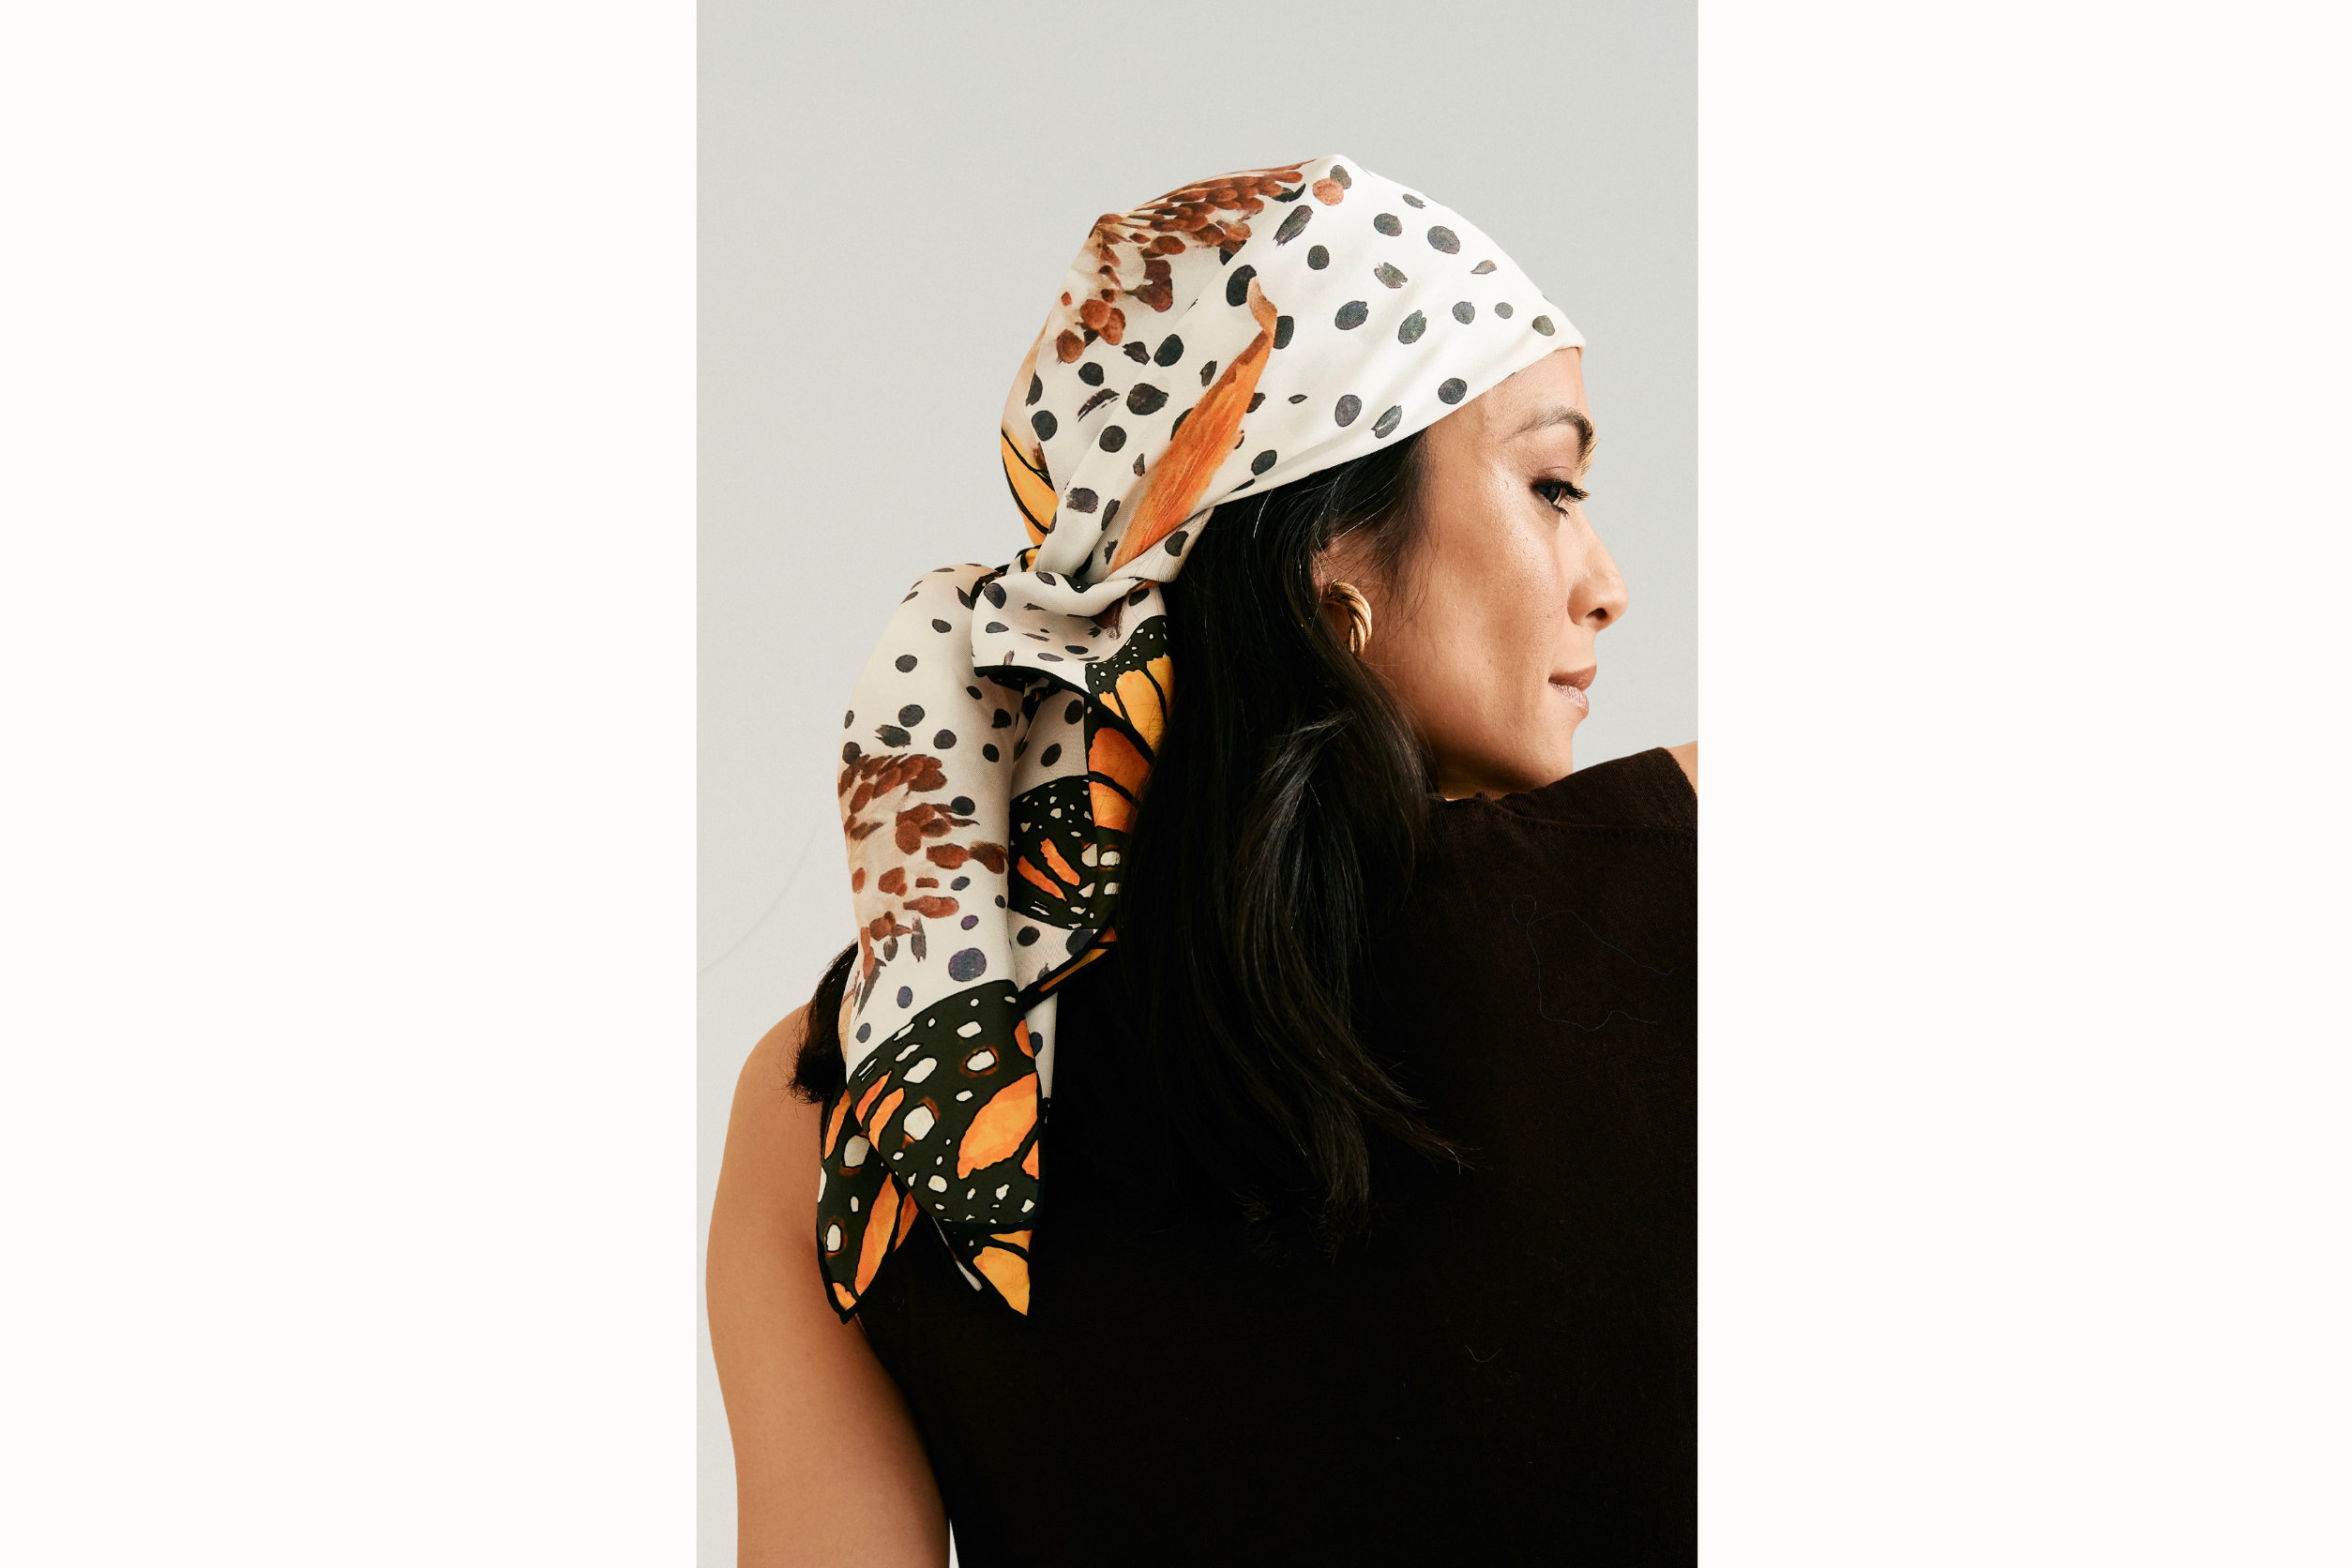 Female model wears scarf as a headscarf, knotted in the back. She wears gold hoops and a black tank as she looks over her shoulder.